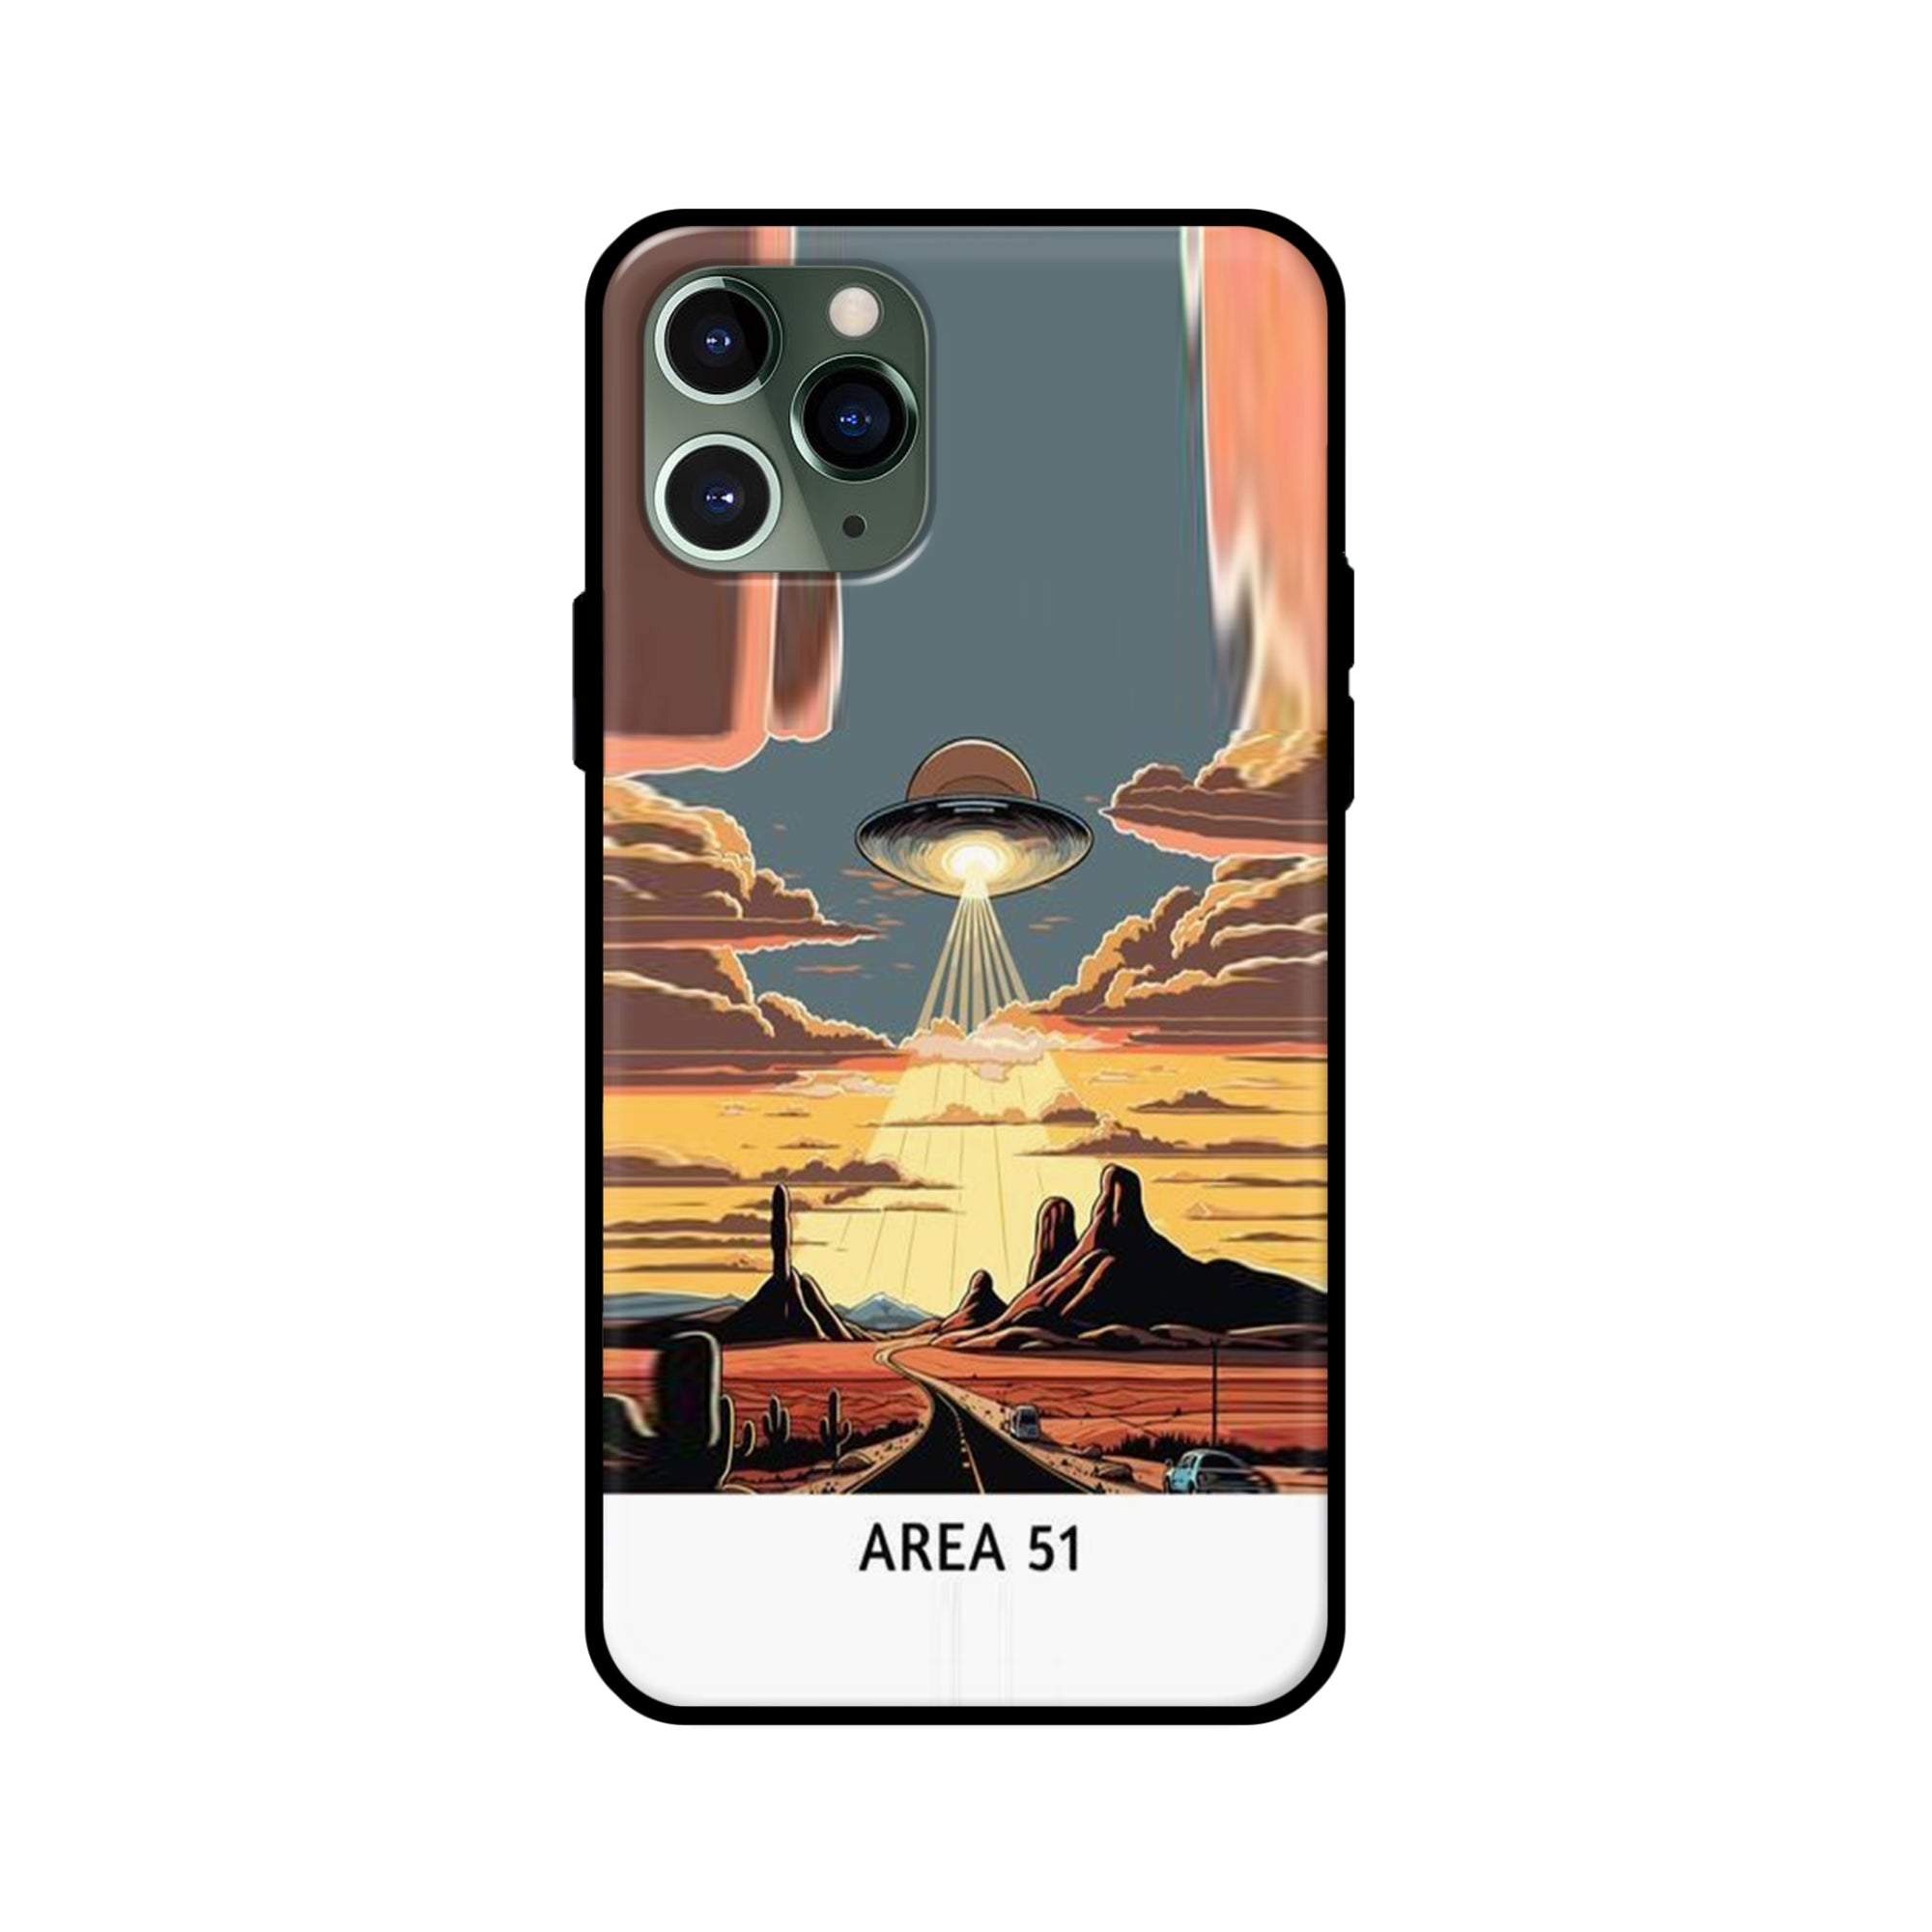 Buy Area 51 Glass/Metal Back Mobile Phone Case/Cover For iPhone 11 Pro Online